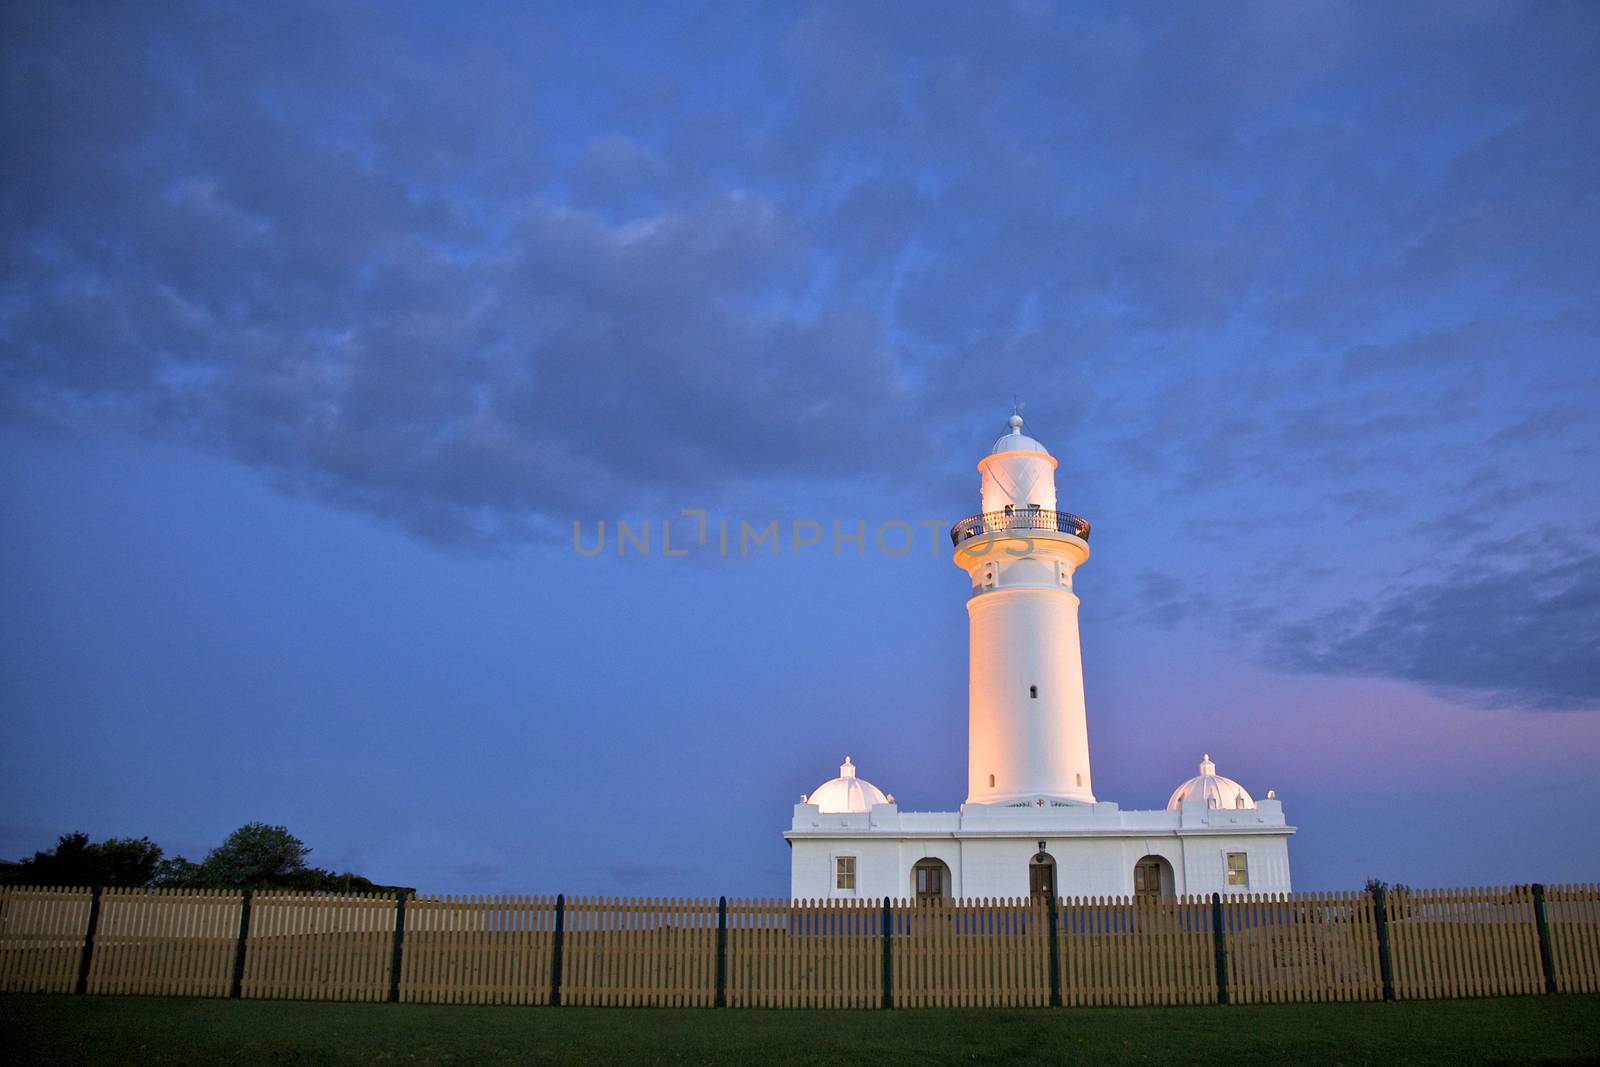 Picture of Macquarie Lightstation Sydney Australia It was Built 1818 by Governor Macquarie but in 1835 the Tower Began Crumble and Finally in 1883 There was Build Replica of the Original Macquarie Lighthouse Australia's First Lighthouse at Night in Sydney Point